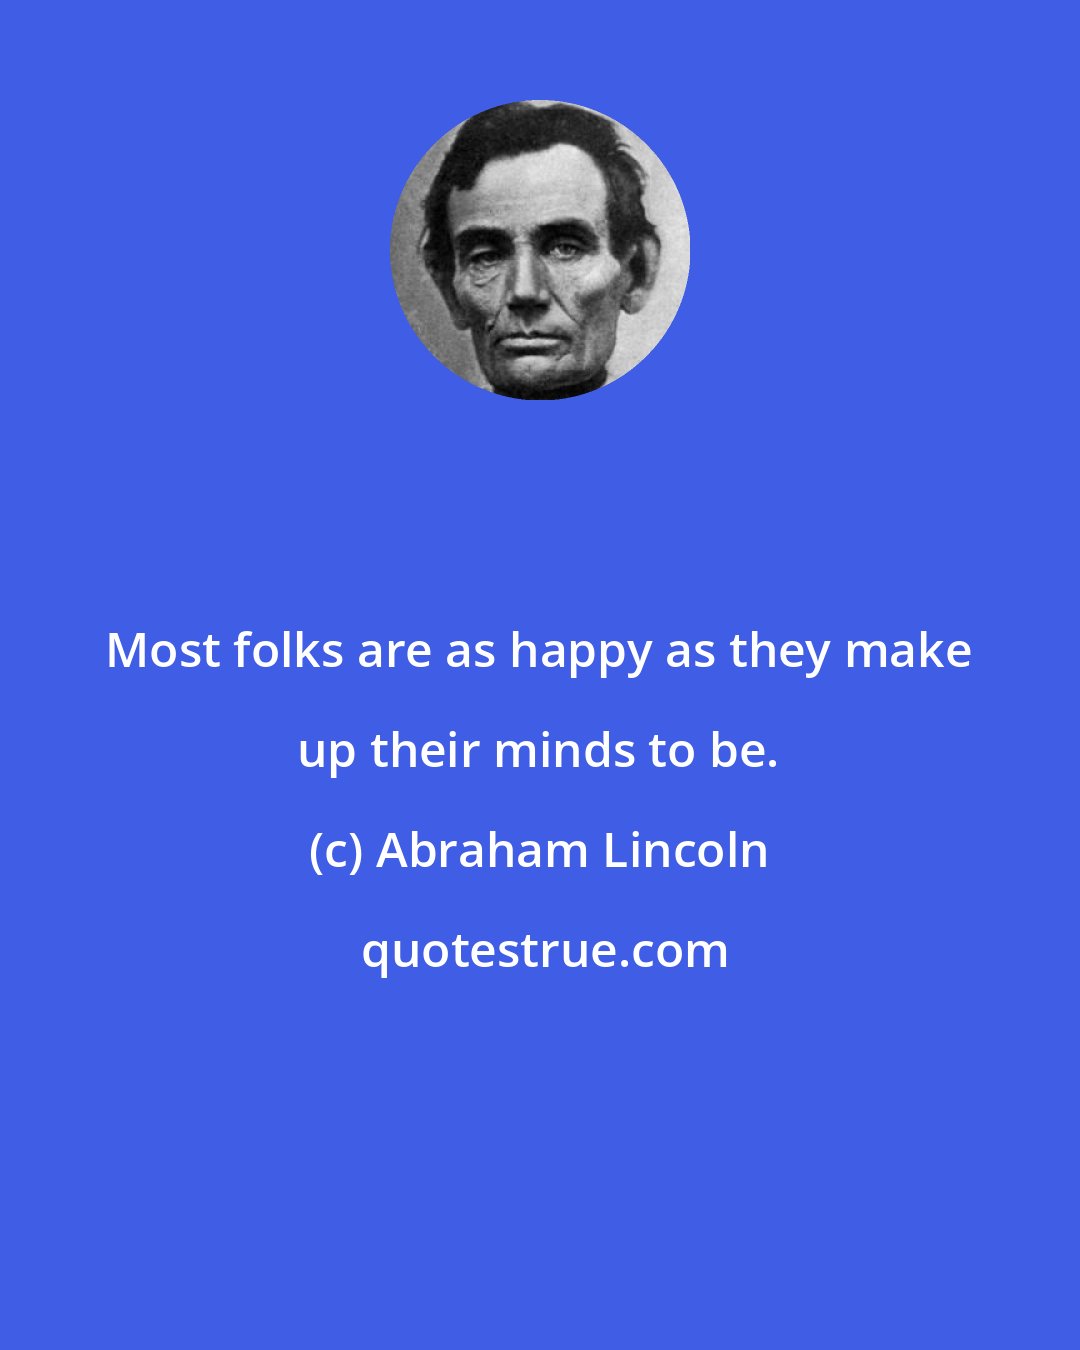 Abraham Lincoln: Most folks are as happy as they make up their minds to be.